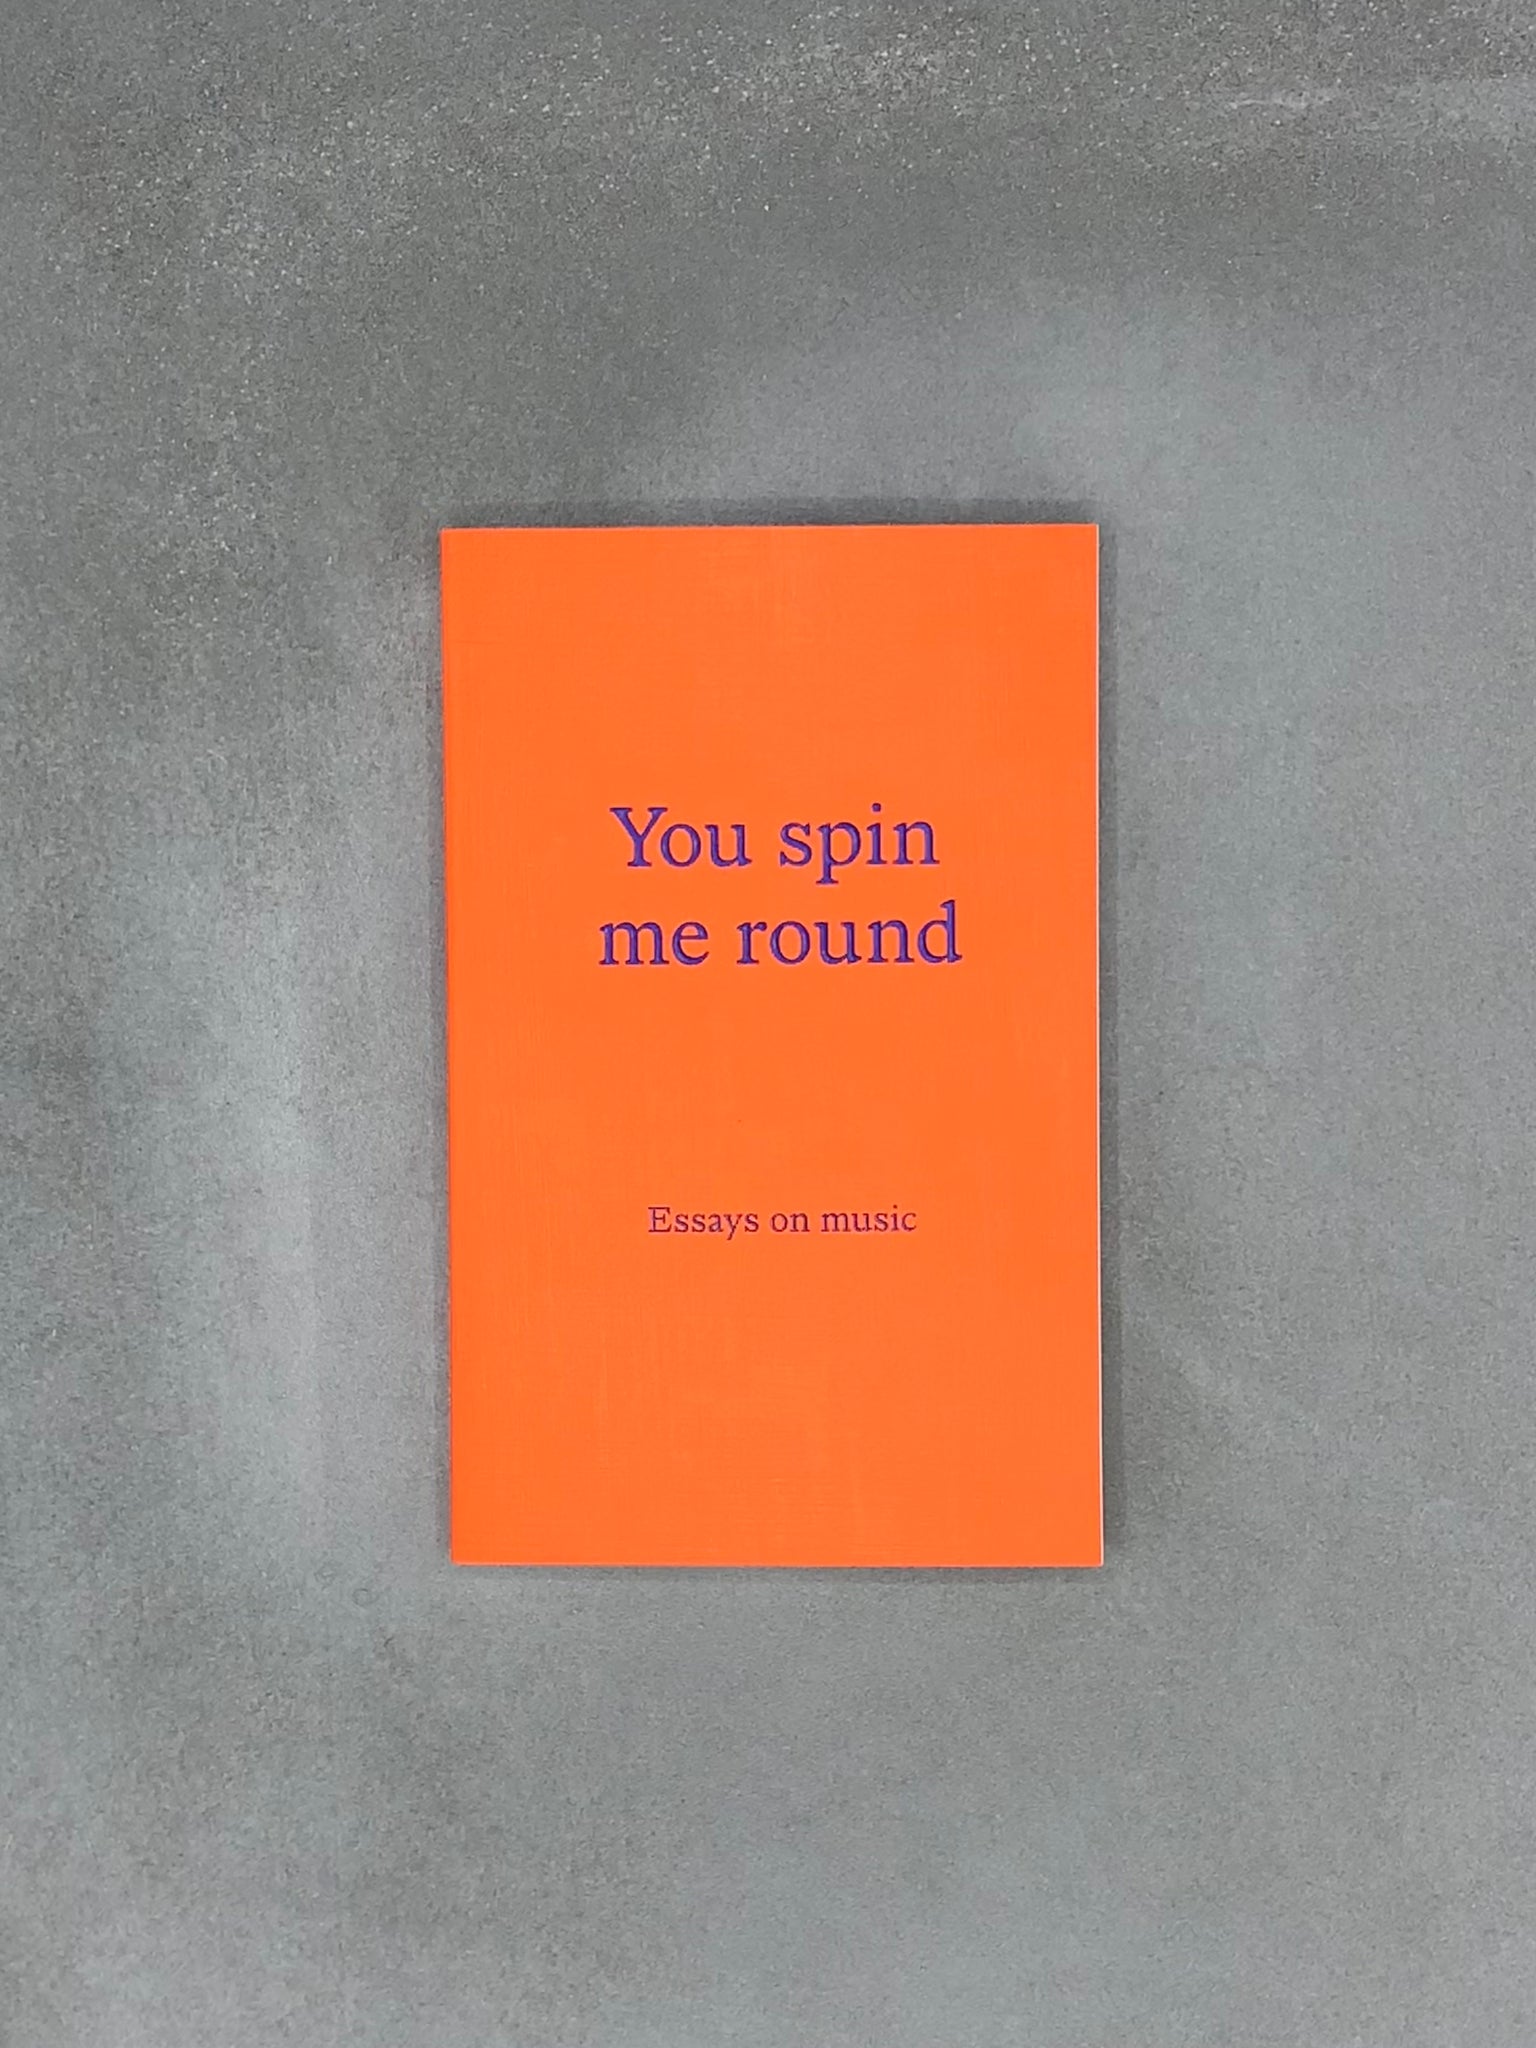 You spin me round: Essays on music